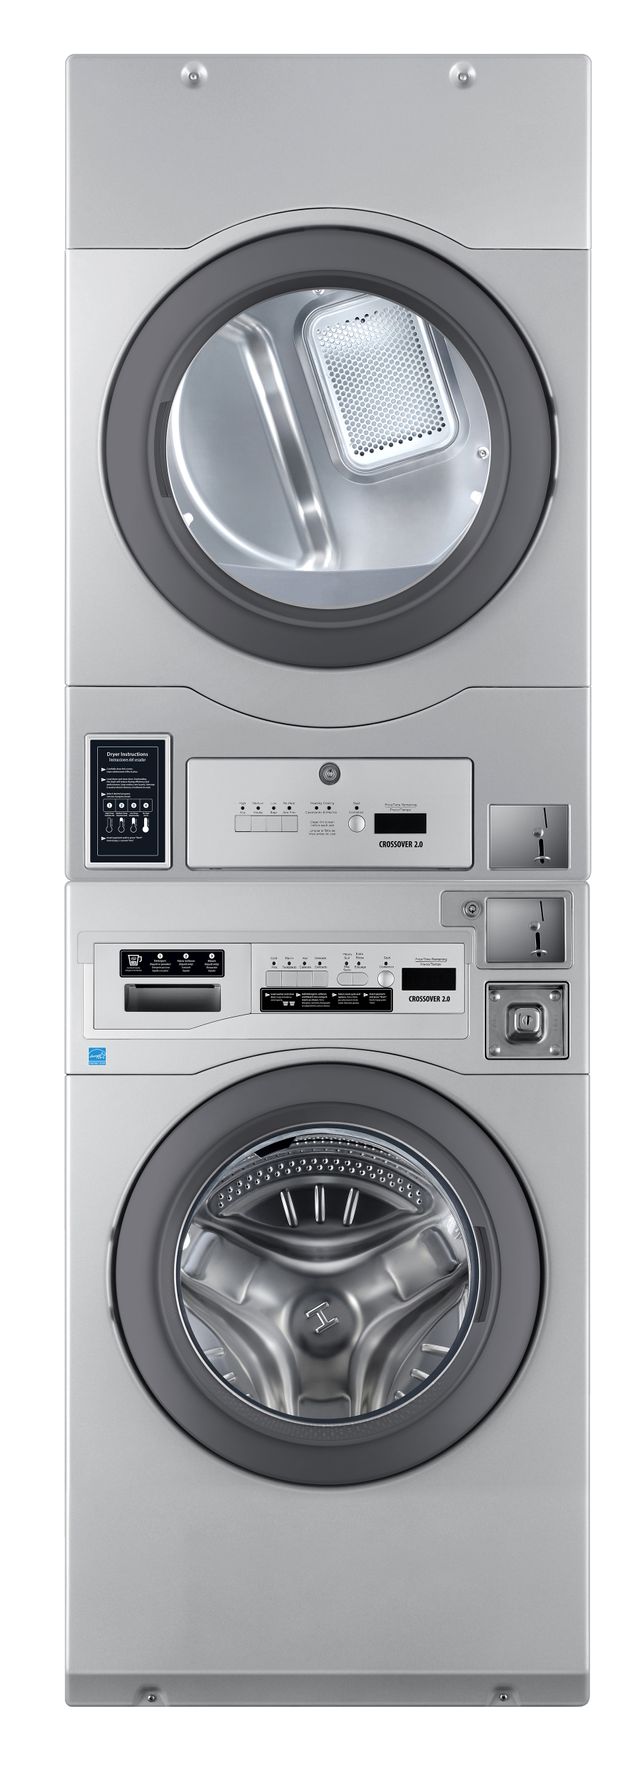 Crossover True Commercial Laundry 3.5 Cu. Ft. Silver Heavy Duty Front Load Washer with Coin Option/Card Ready Included 1